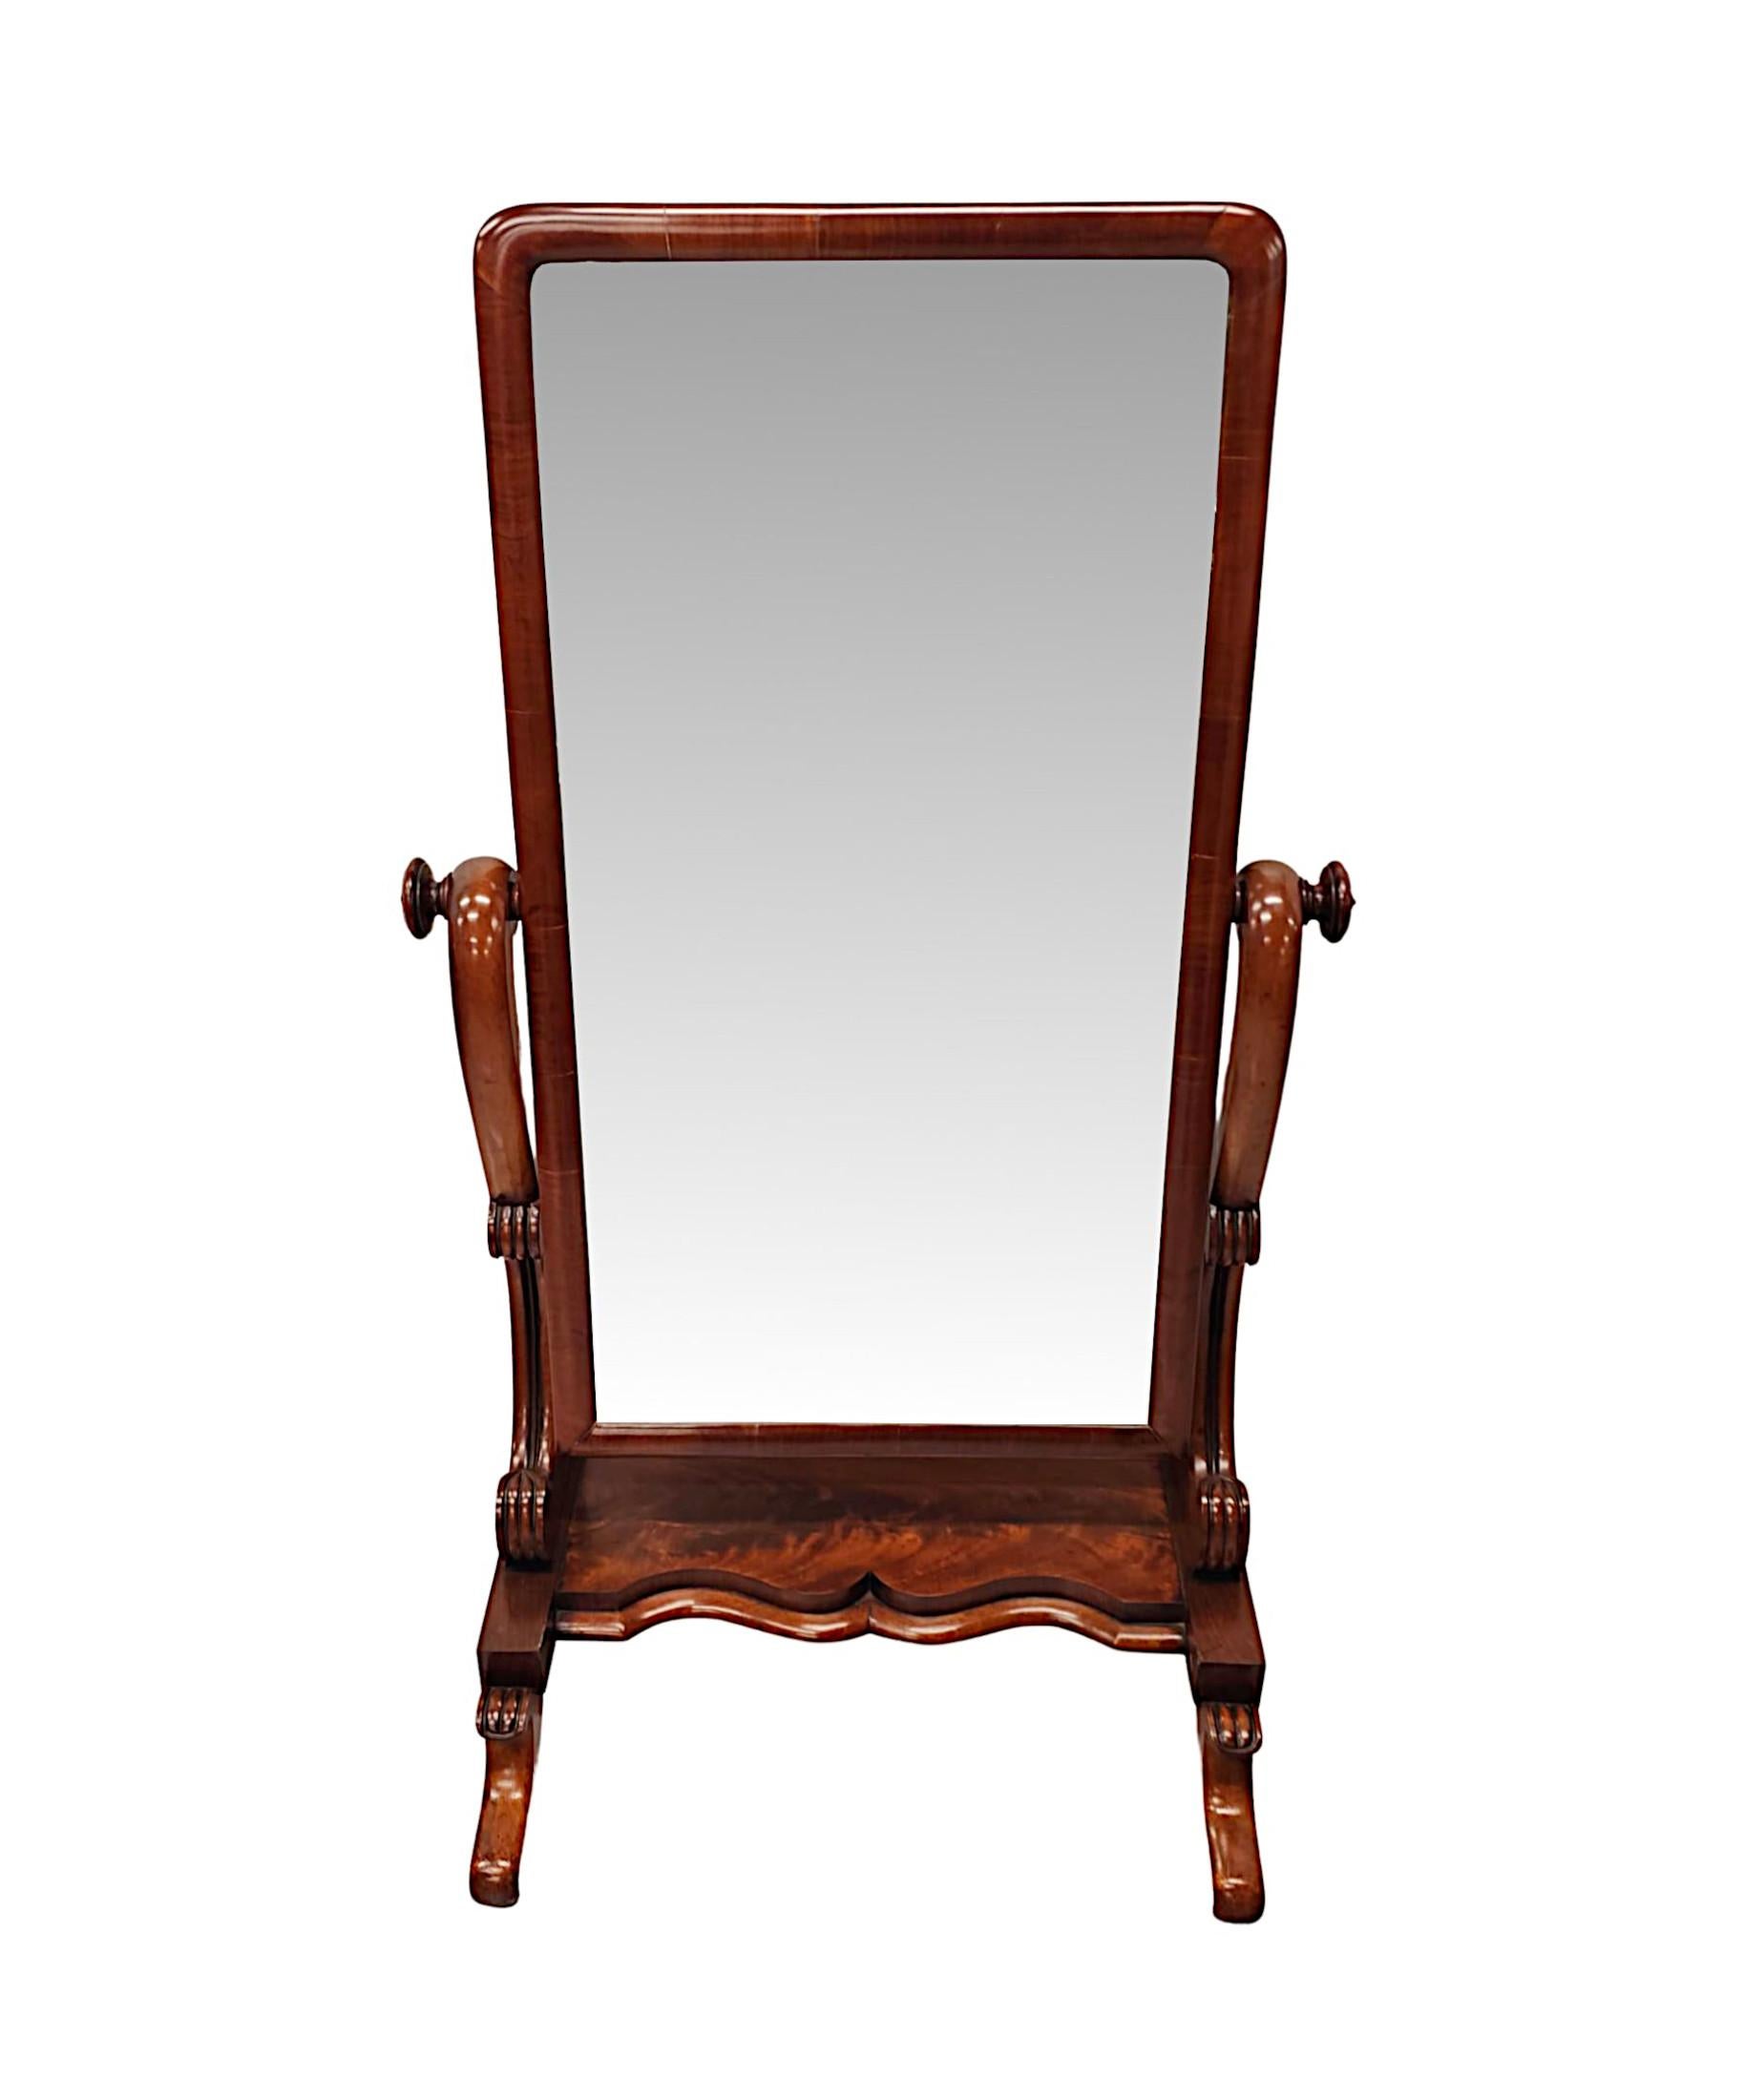 English A Very Fine 19th Century Flame Mahogany Cheval Mirror For Sale